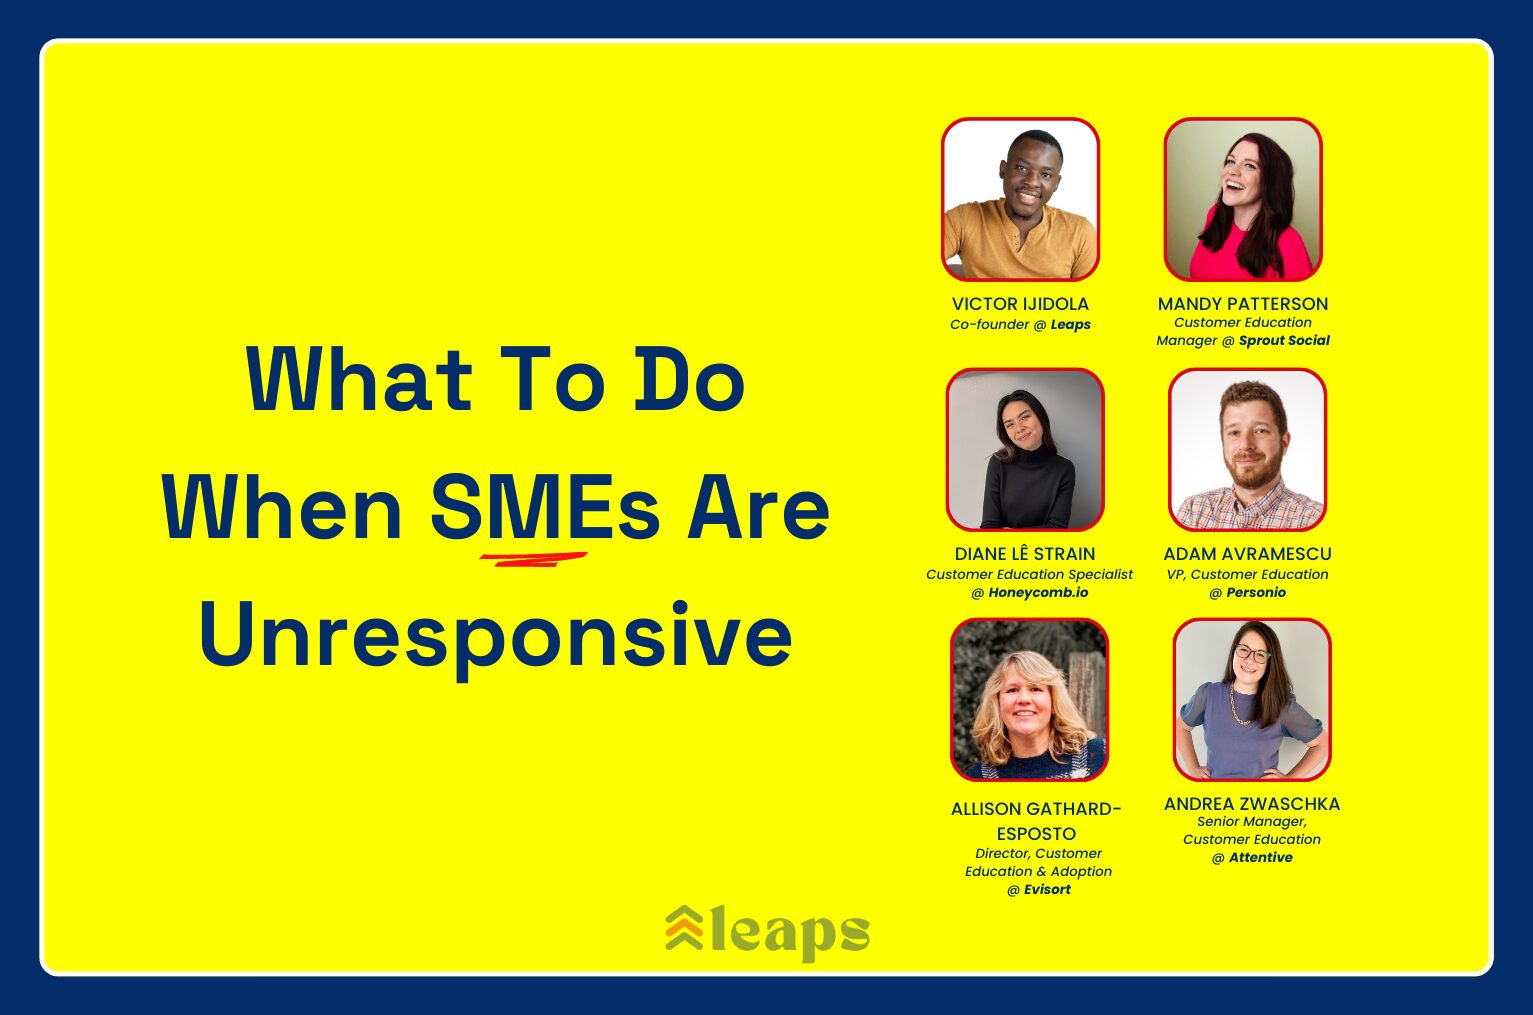 What To Do When SMEs Are Unresponsive